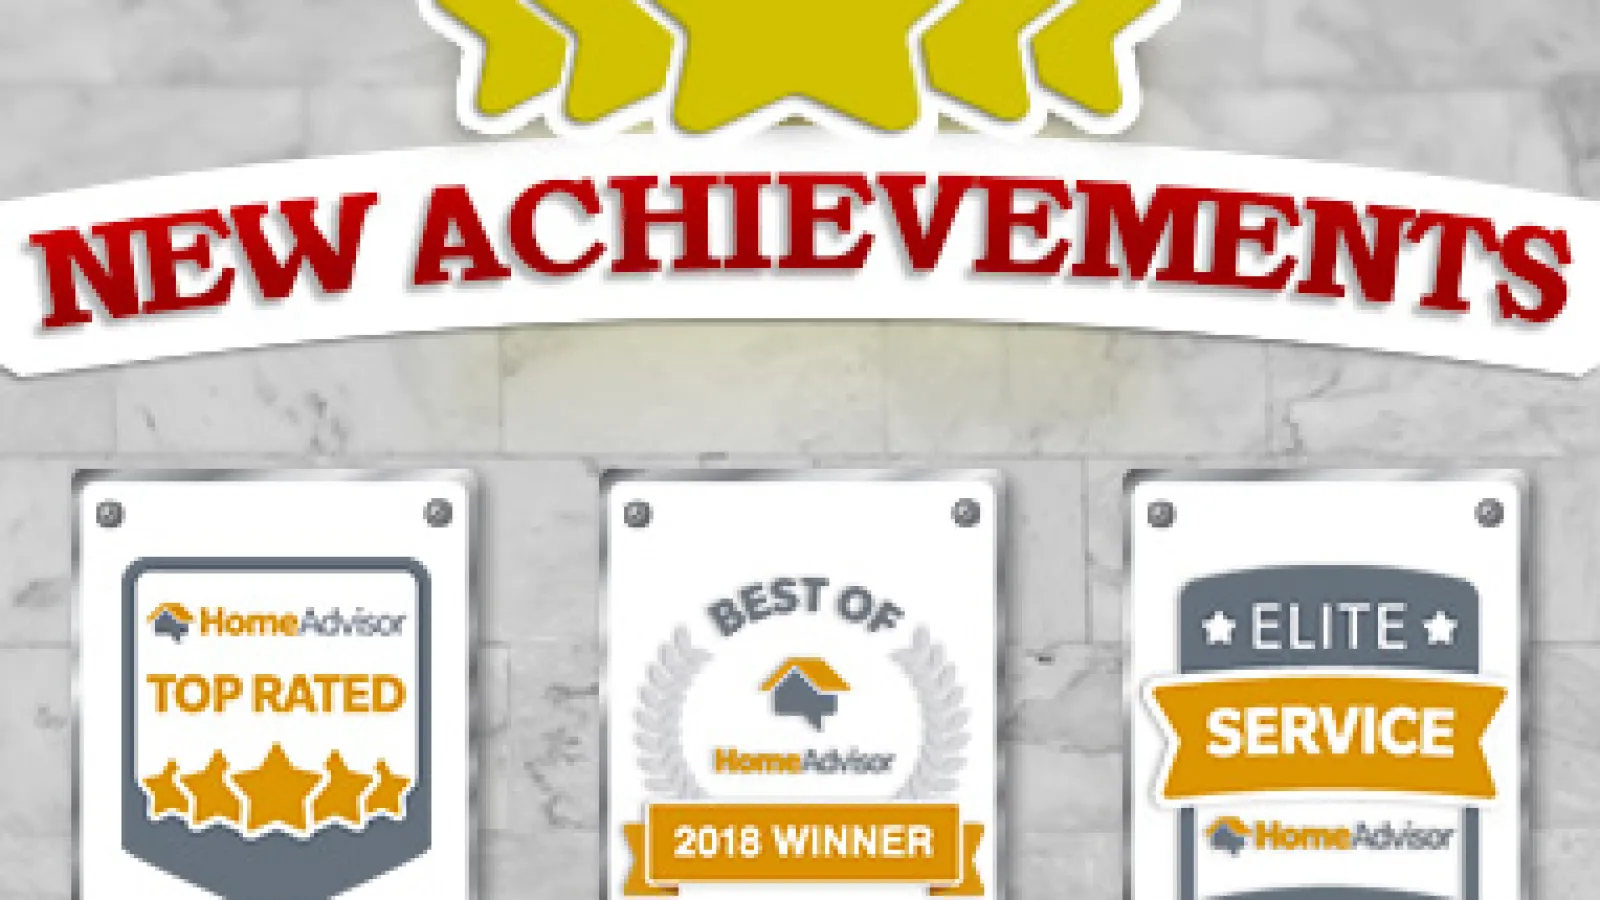 For Their Outstanding Customer Service, Sir Grout Franchises Have Been Honored with Home Advisor's Prestigious Awards